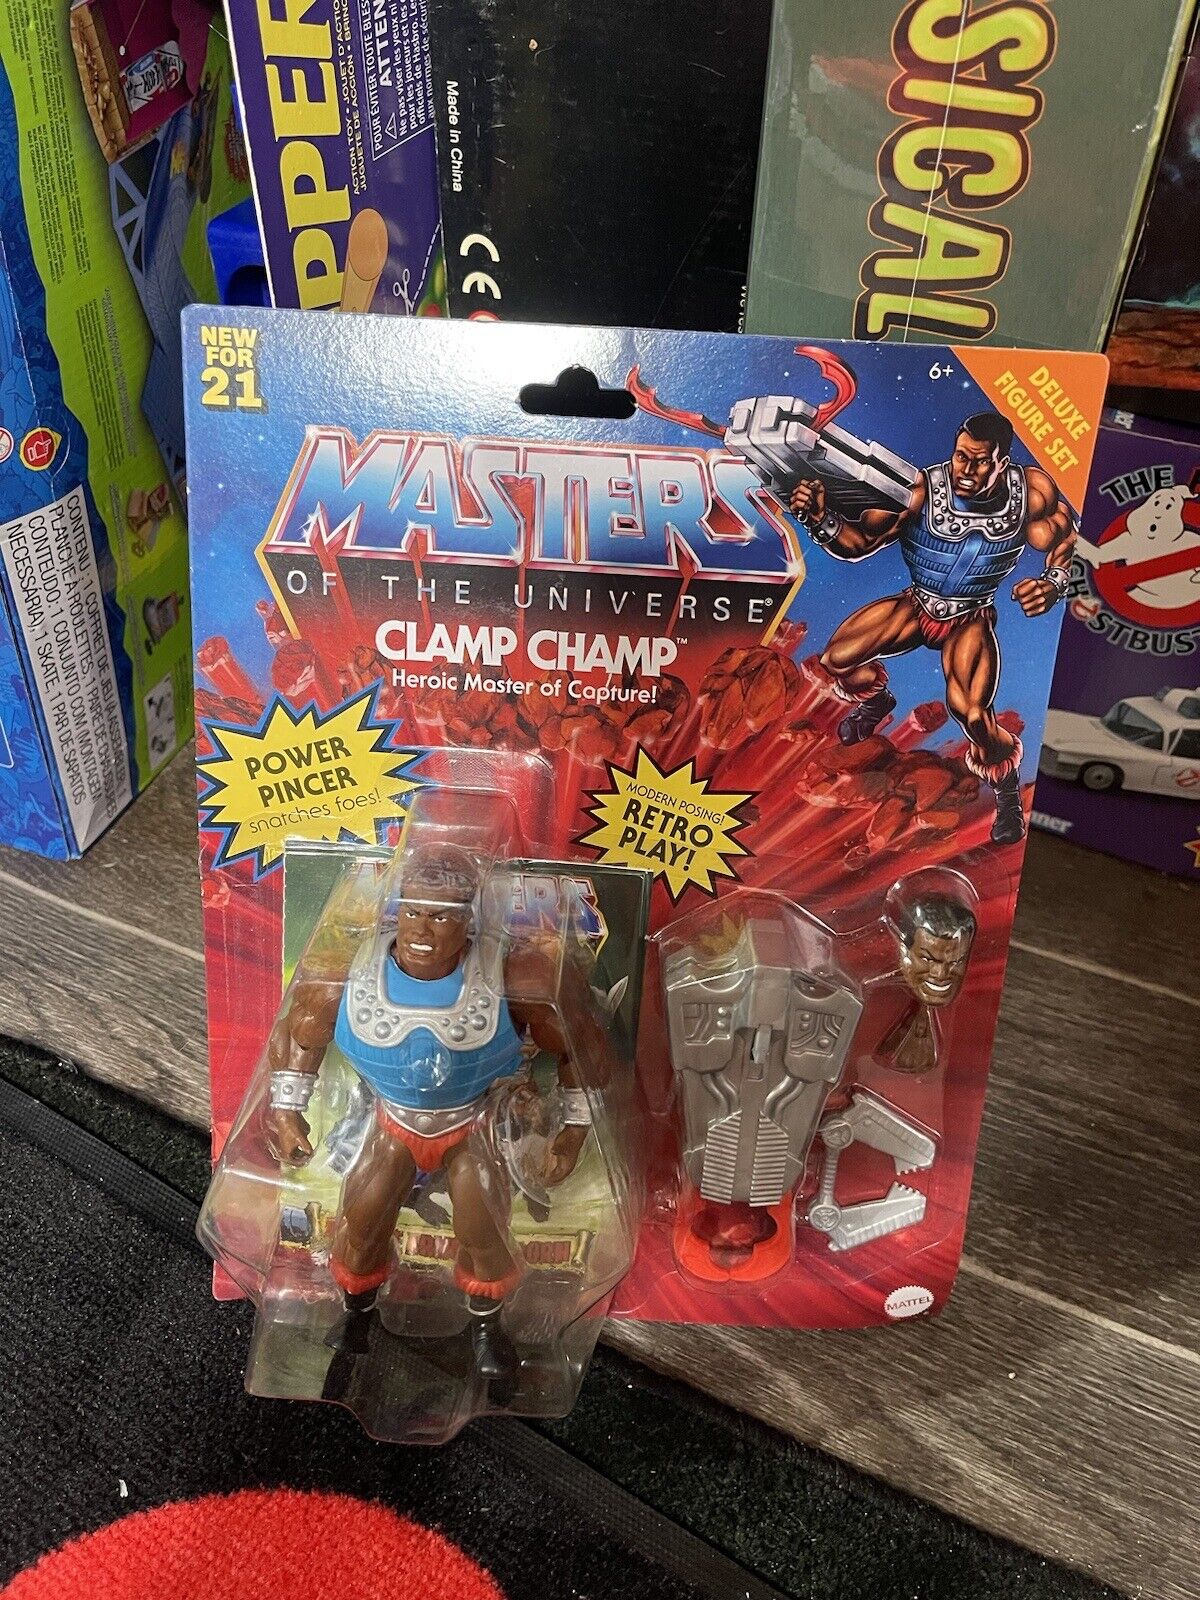 NON-MINT NEW Masters of the Universe MOTU CLAMP CHAMP Deluxe Figure Set